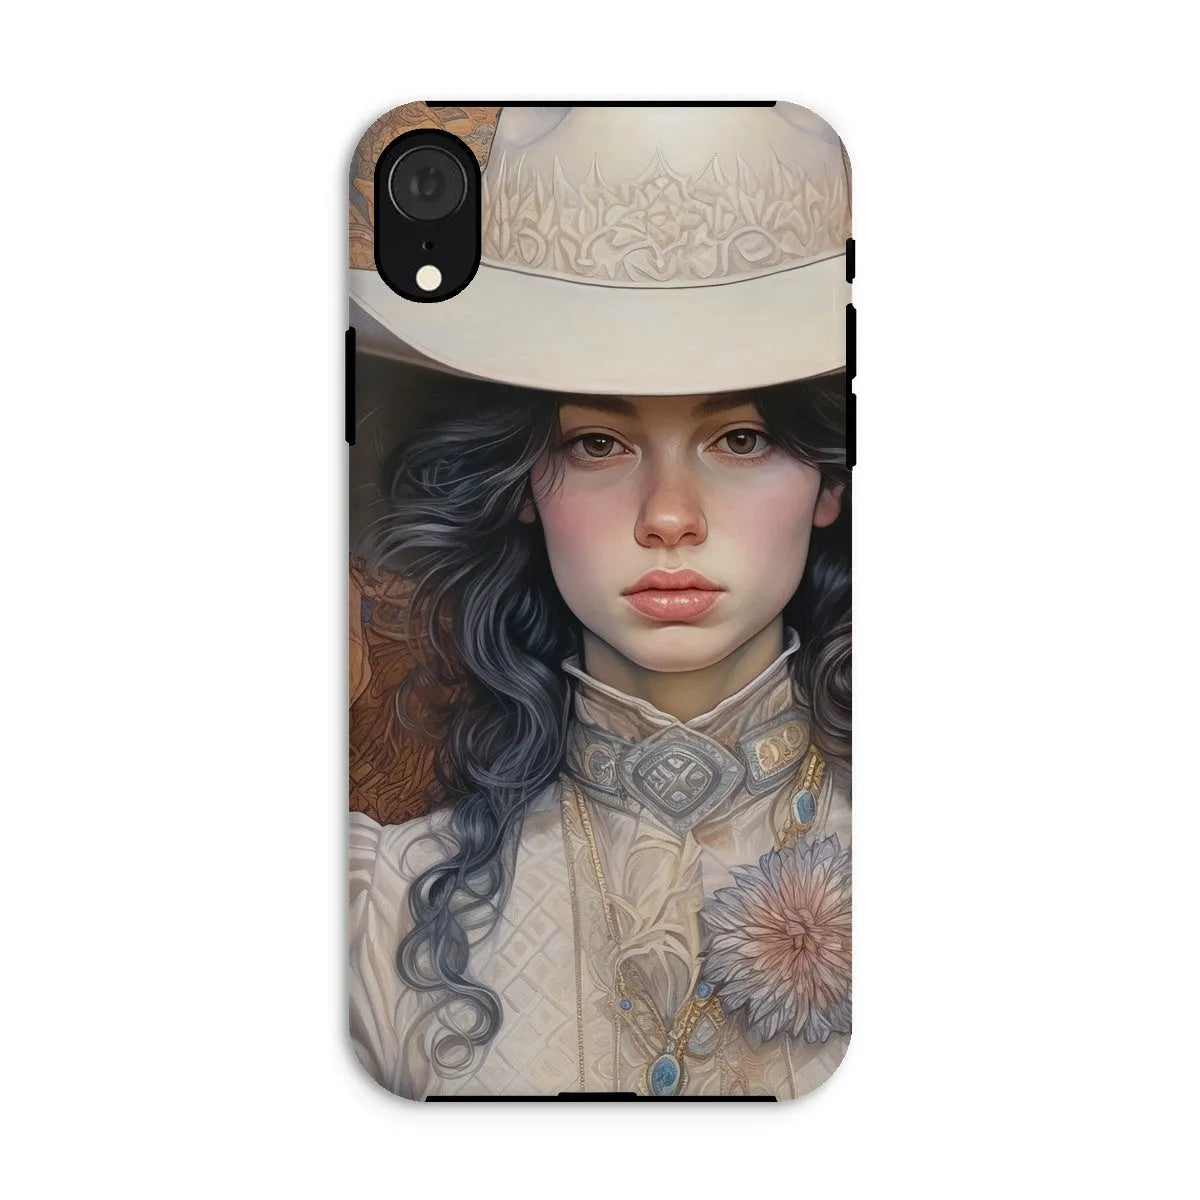 Helena The Lesbian Cowgirl - Sapphic Art Phone Case - Iphone Xr / Matte - Mobile Phone Cases - Aesthetic Art